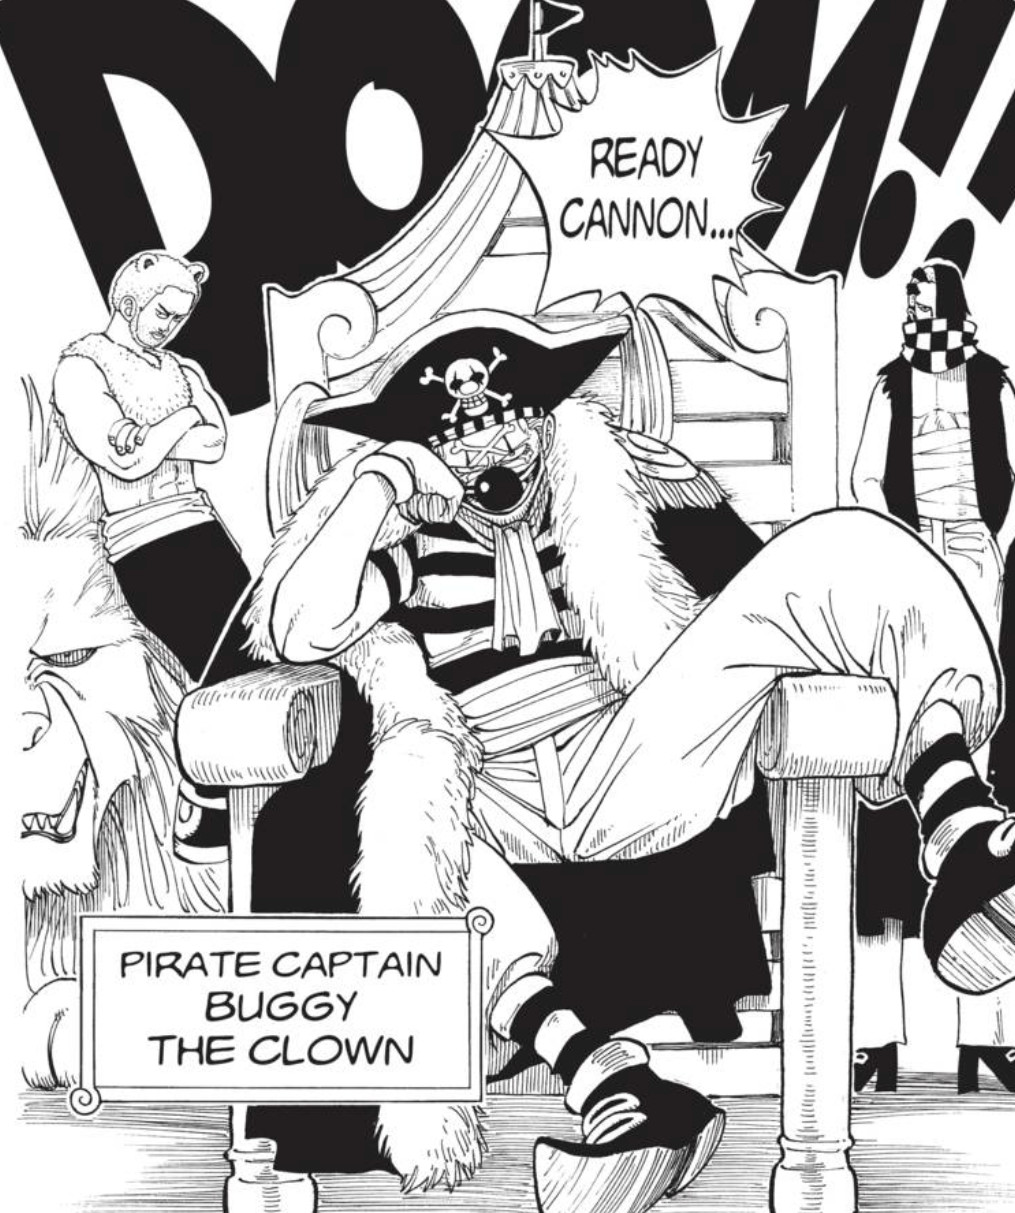 Buggy, from One Piece in the manga. He is the pirate captain known as Buggy the clown. He is leaning in a throne-like chair. He’s leaning on one hand and has his other left slung over an arm of the chair. 